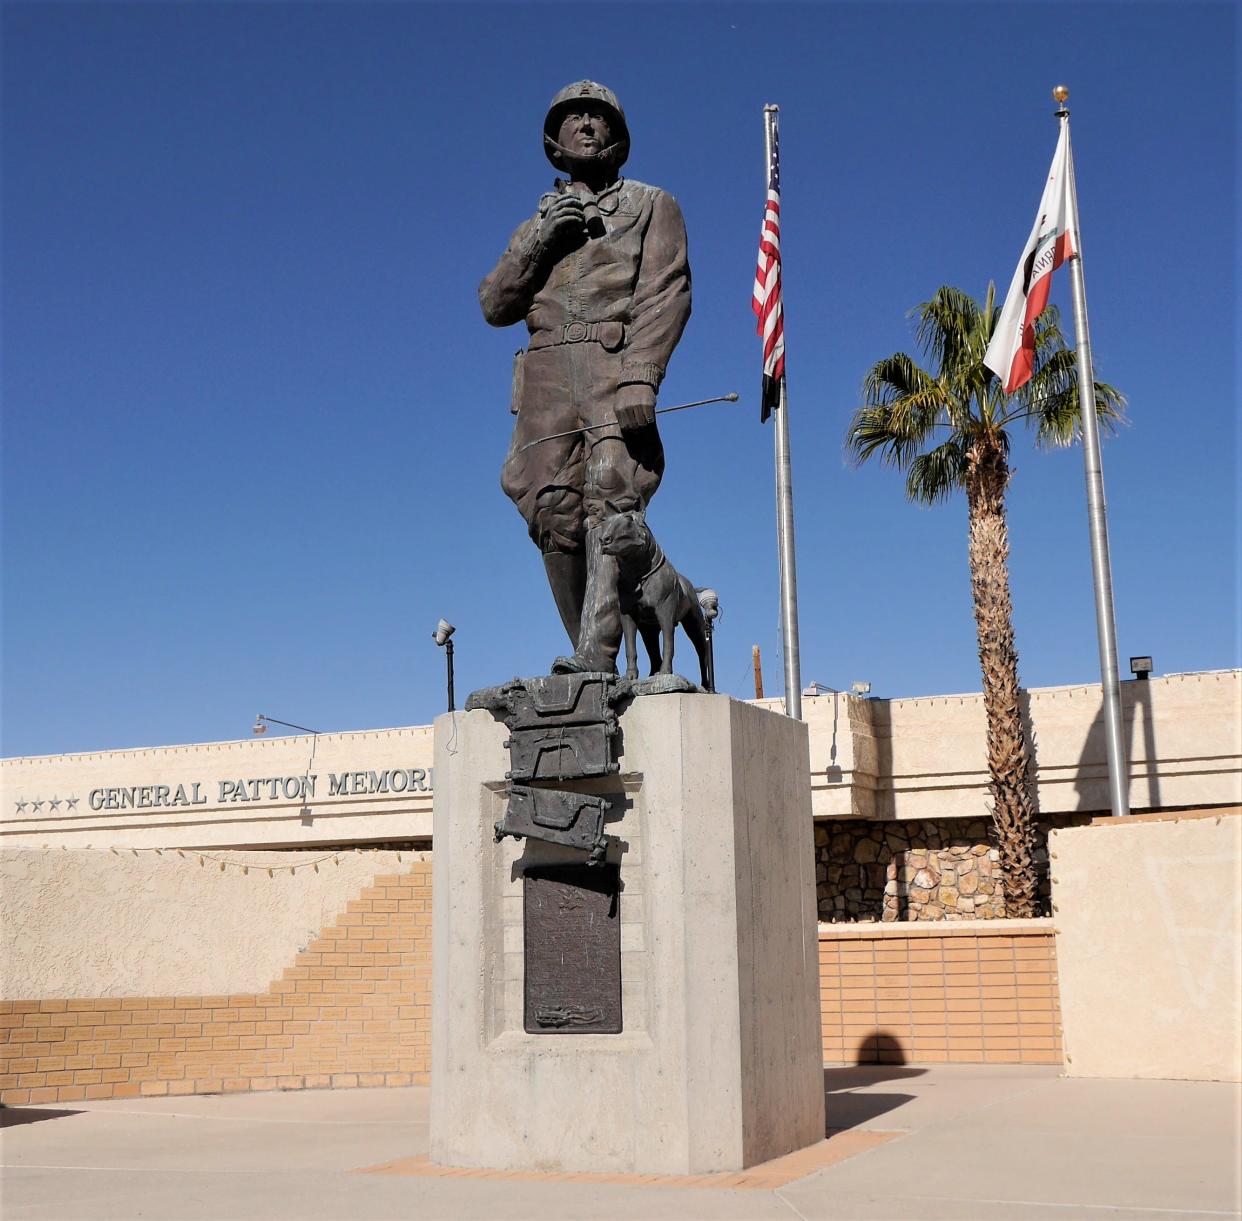 Memorial for General George S. Patton and his dog, Willie